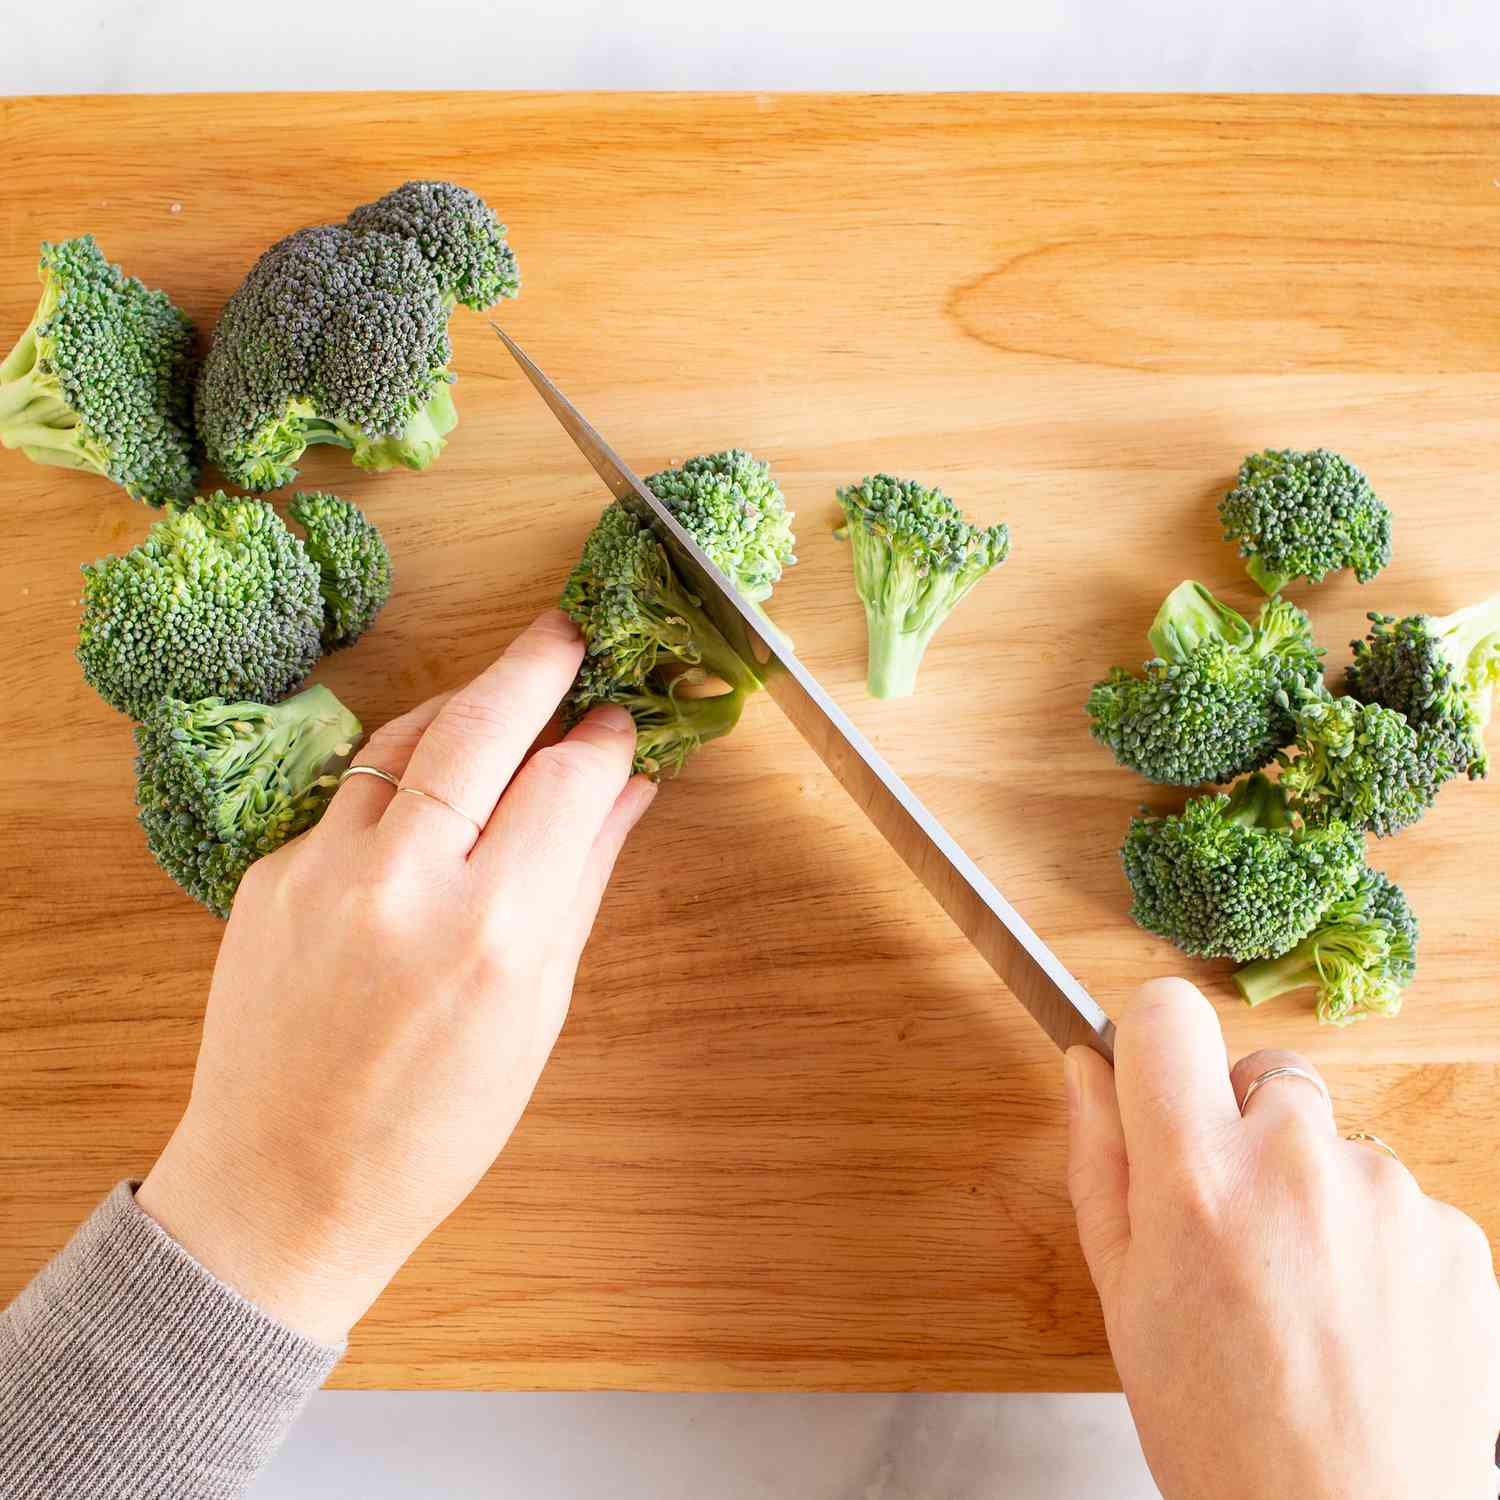 Small broccoli pieces being cut on a cutting board